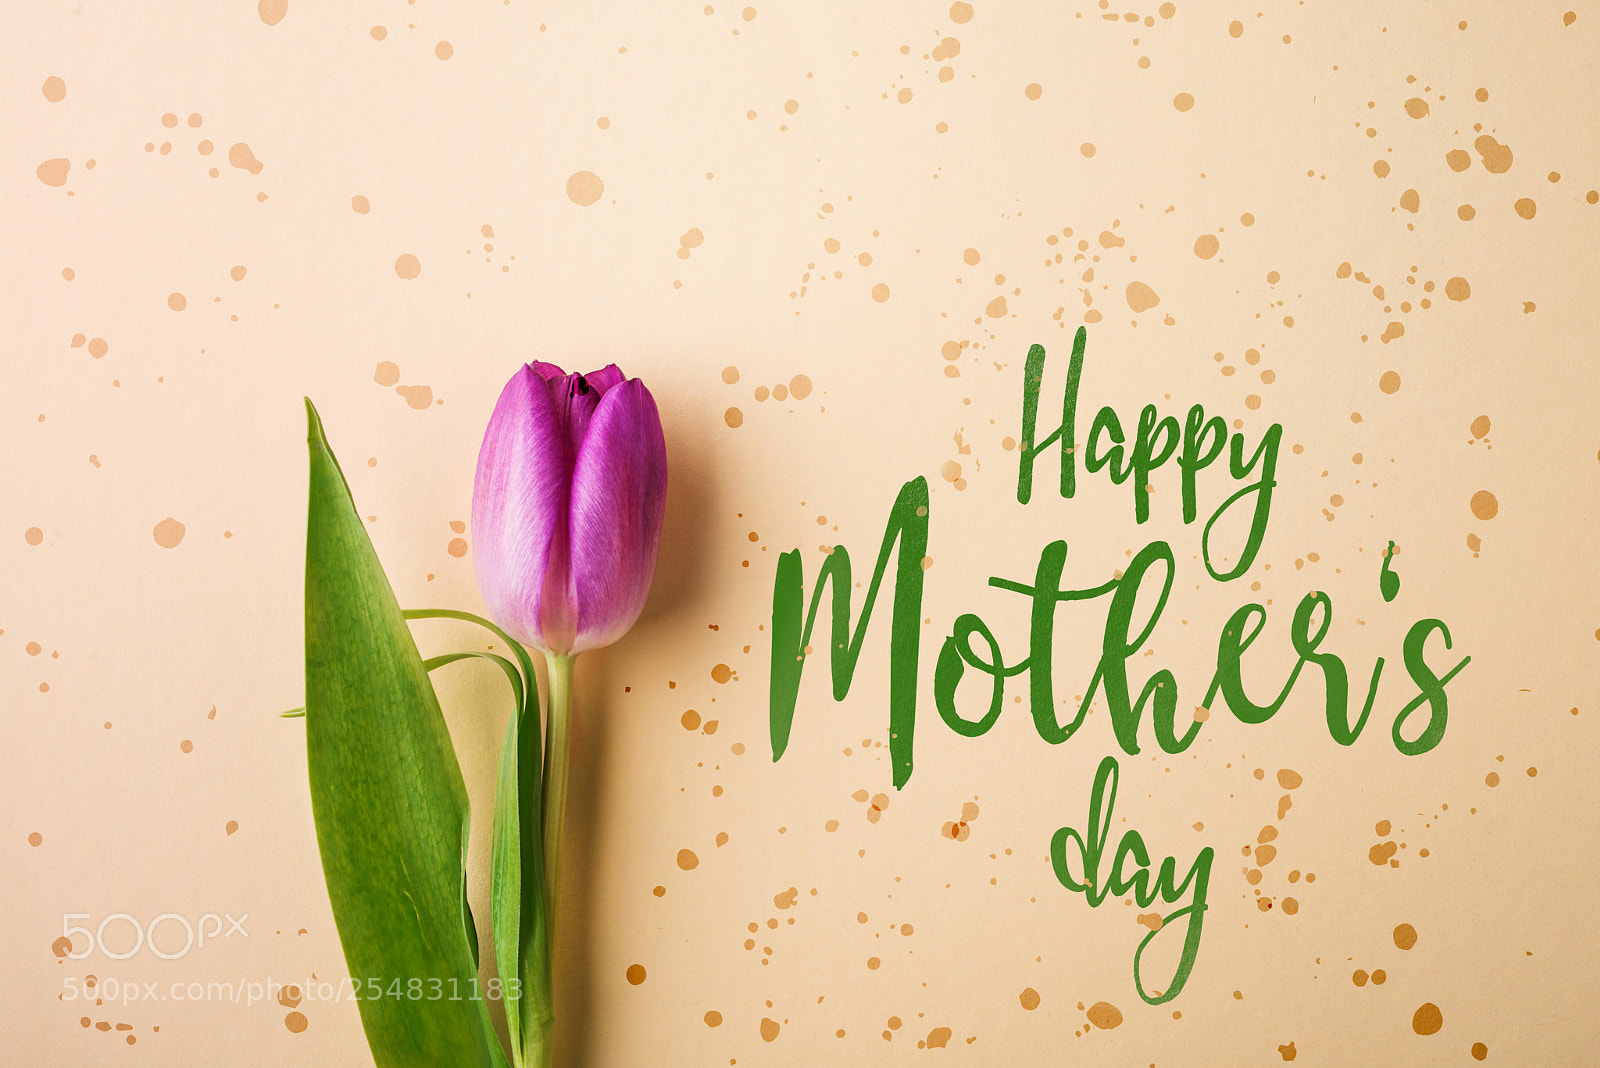 Nikon D800 sample photo. Happy mothers day sign photography